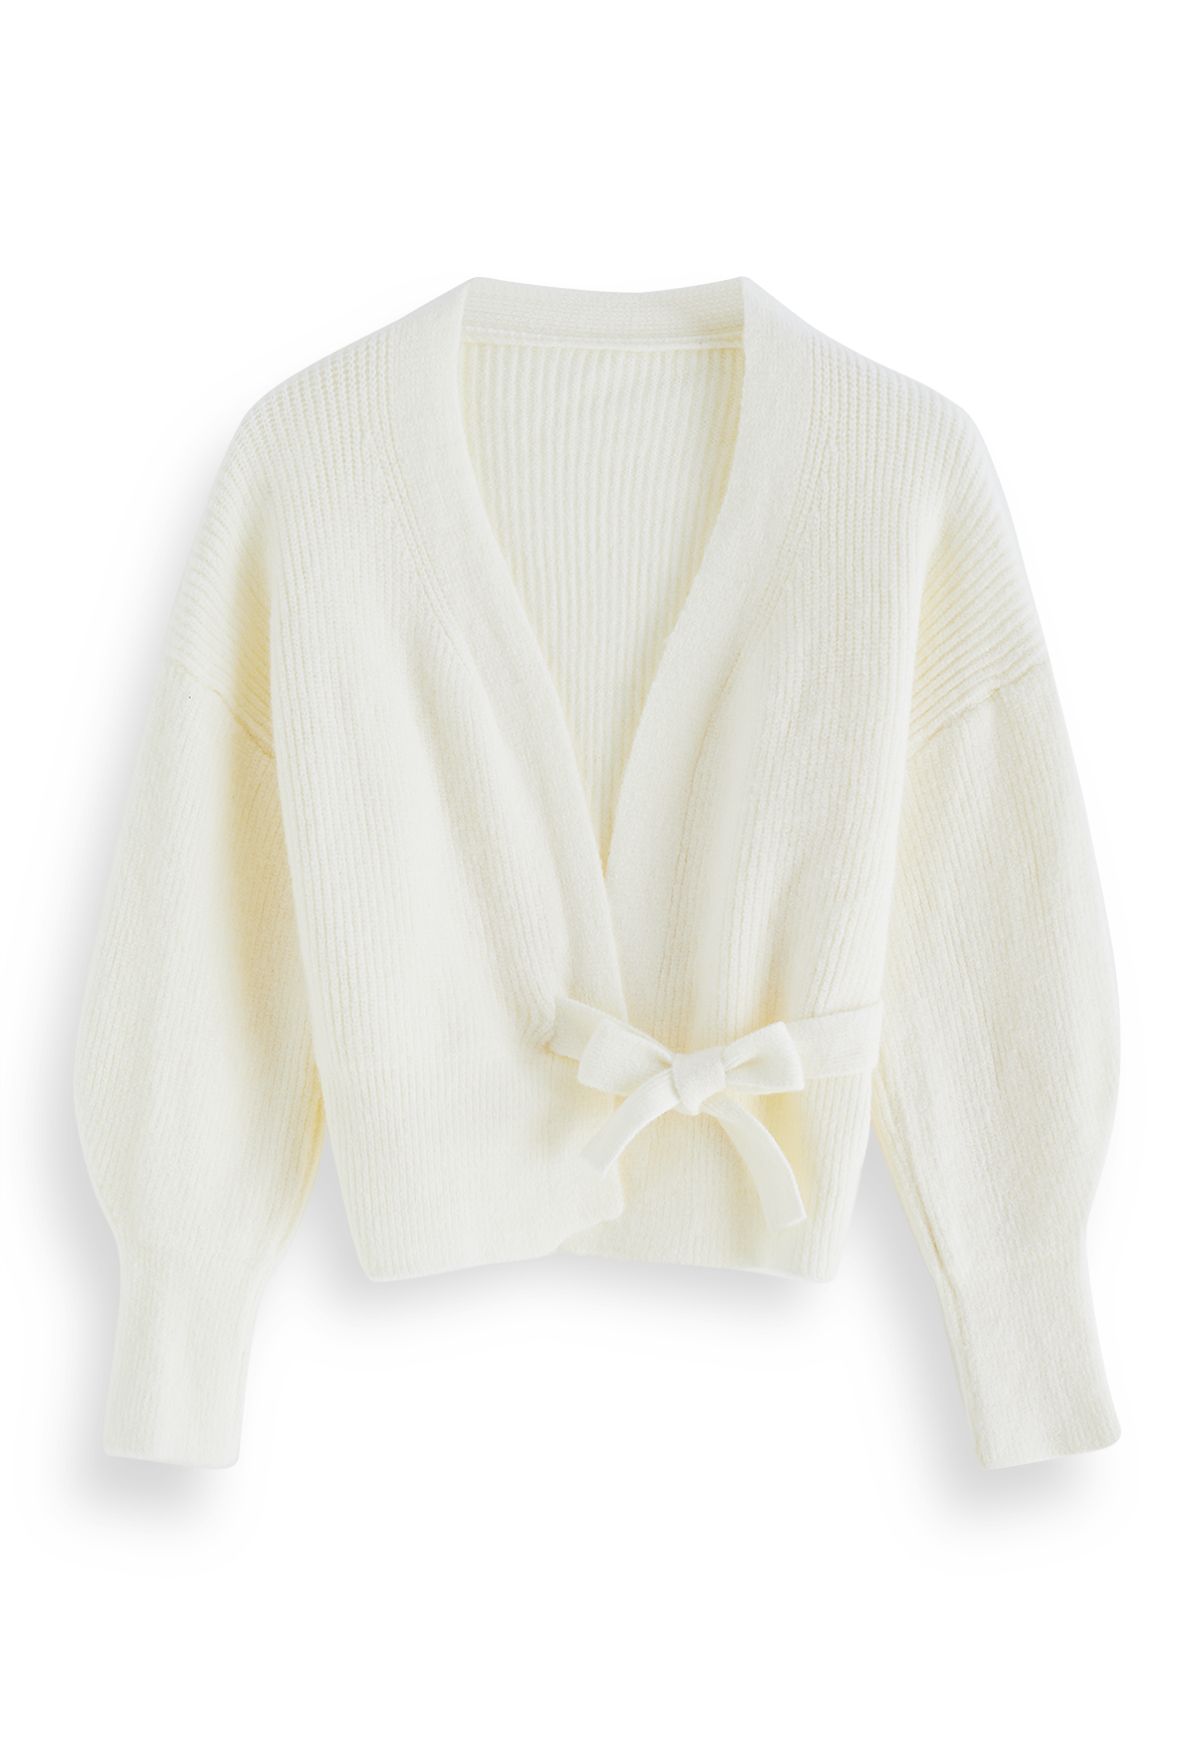 Self-Tie Bowknot Wrap Knit Top in Ivory